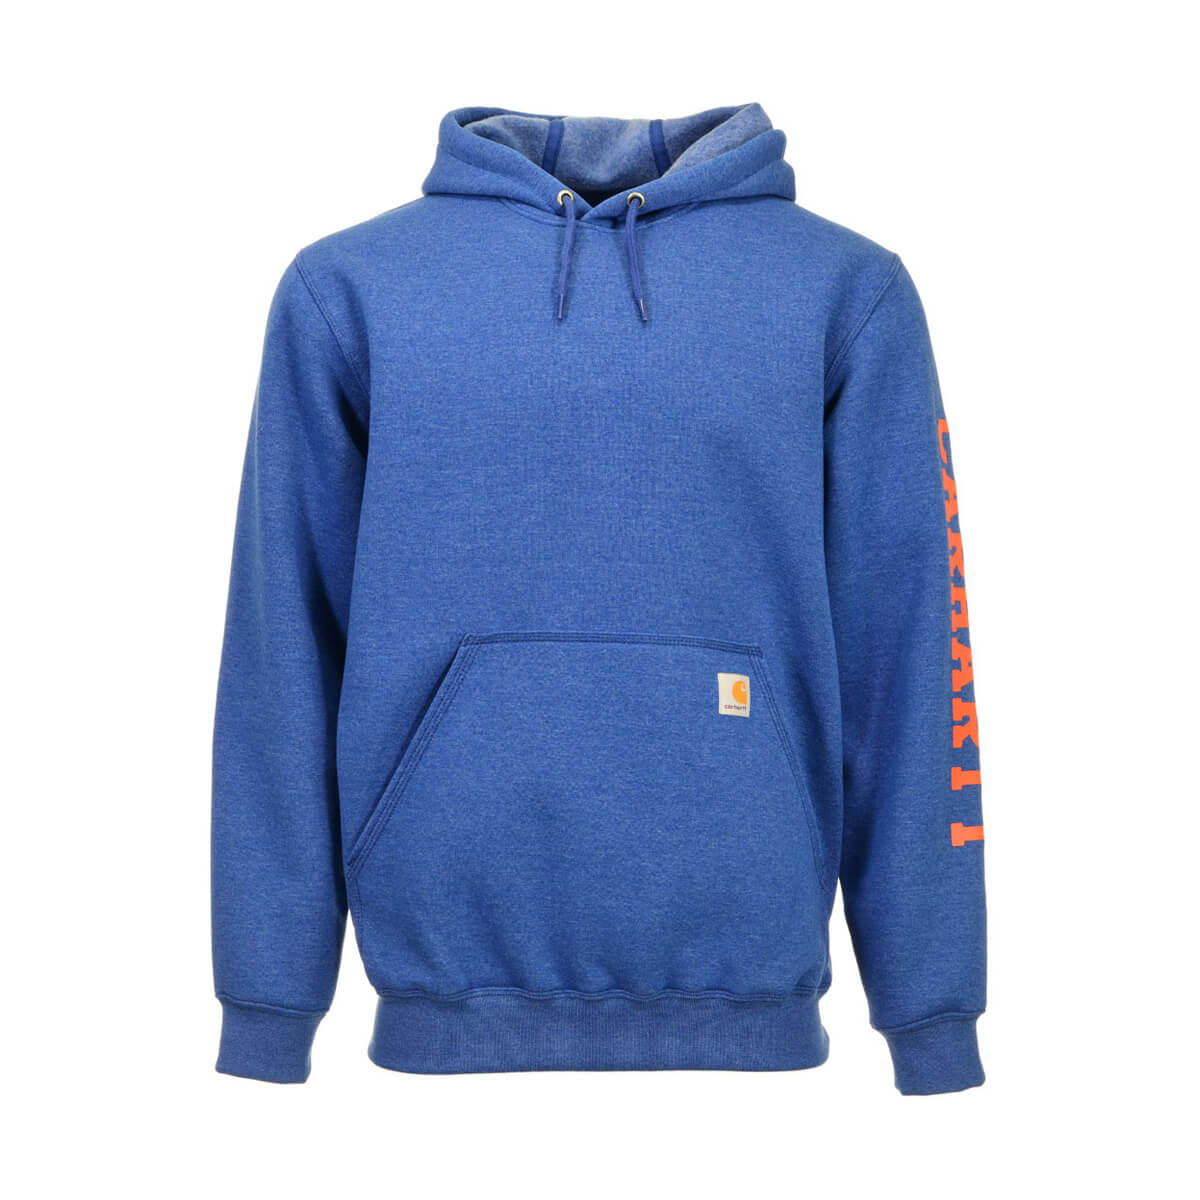 Carhartt Loose Fit Midweight Hooded Graphic Sweatshirt - Lake - S